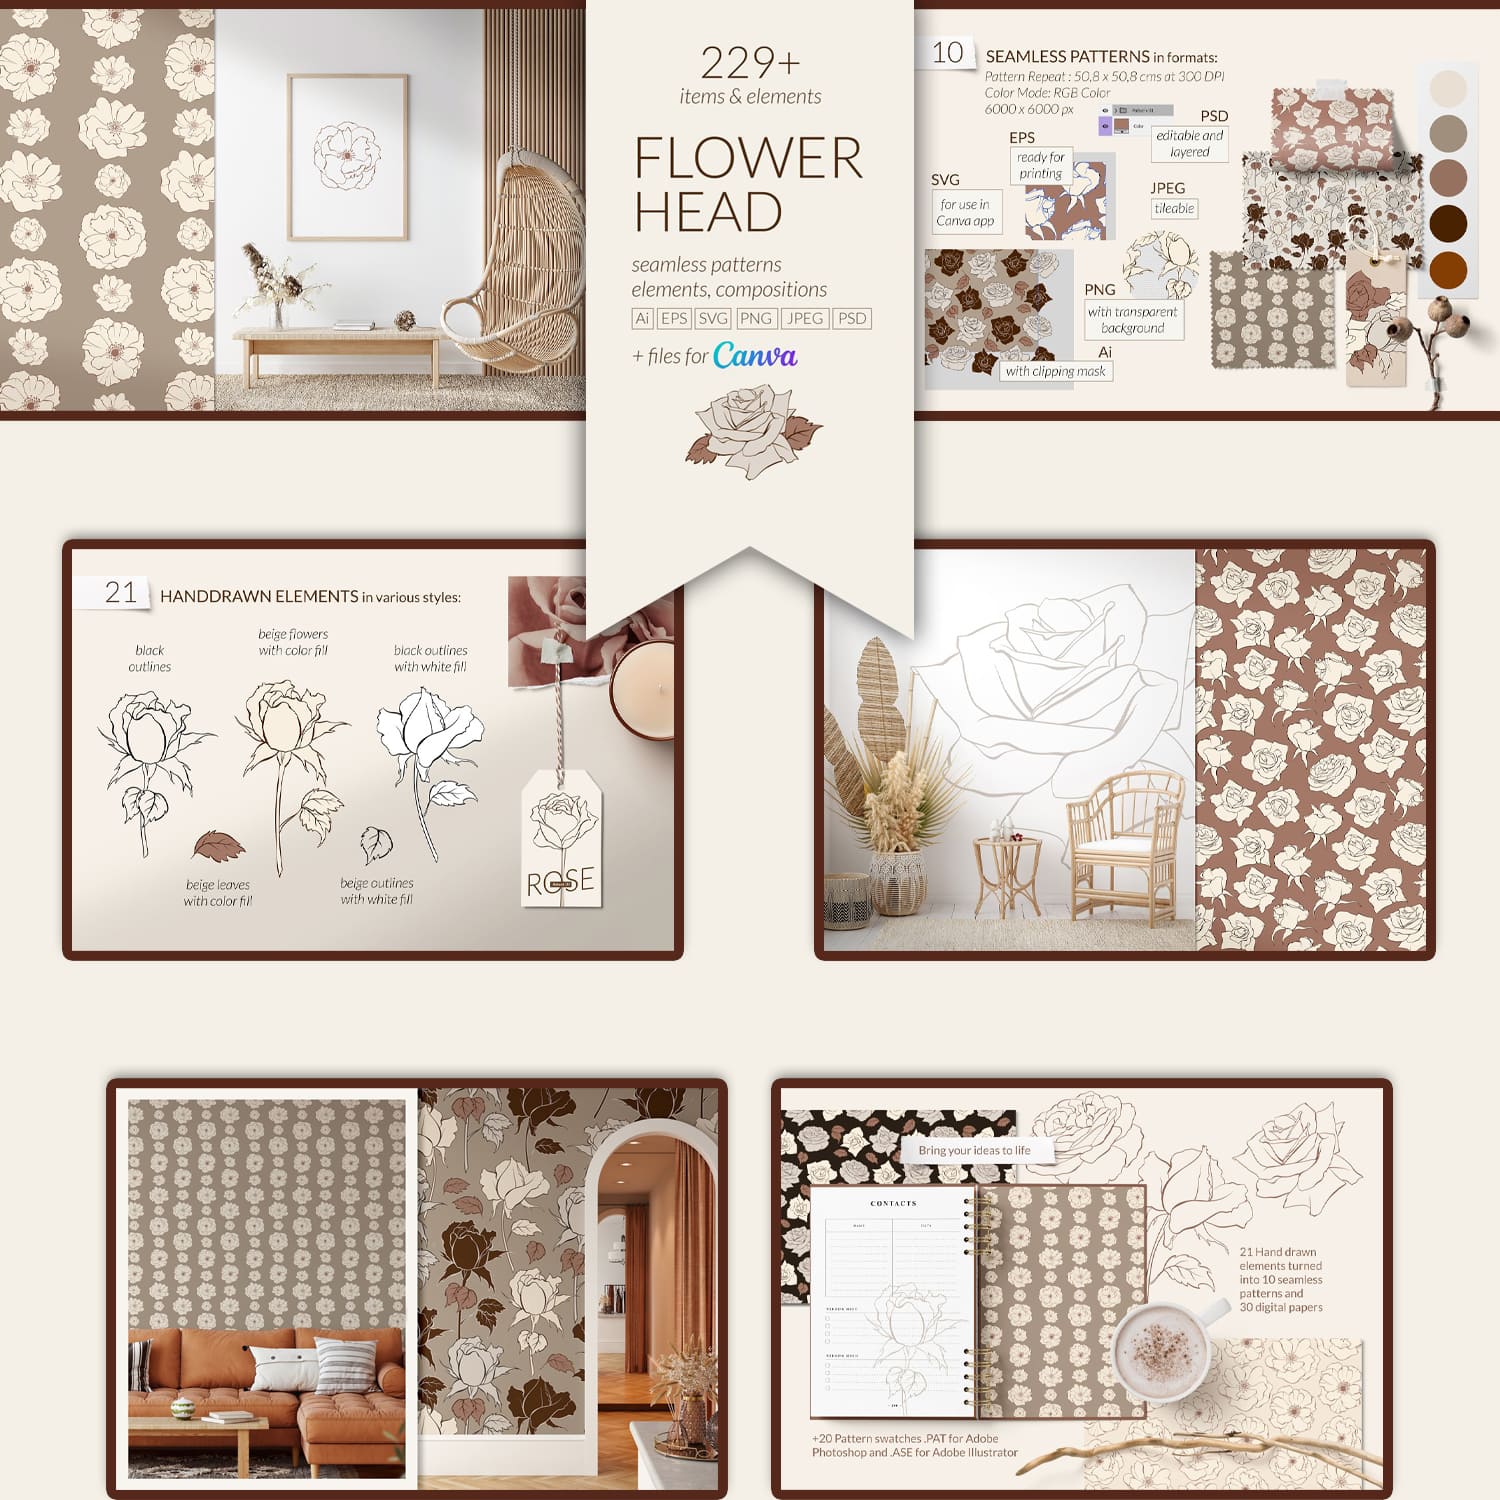 Flowerhead patterns collection - main image preview.